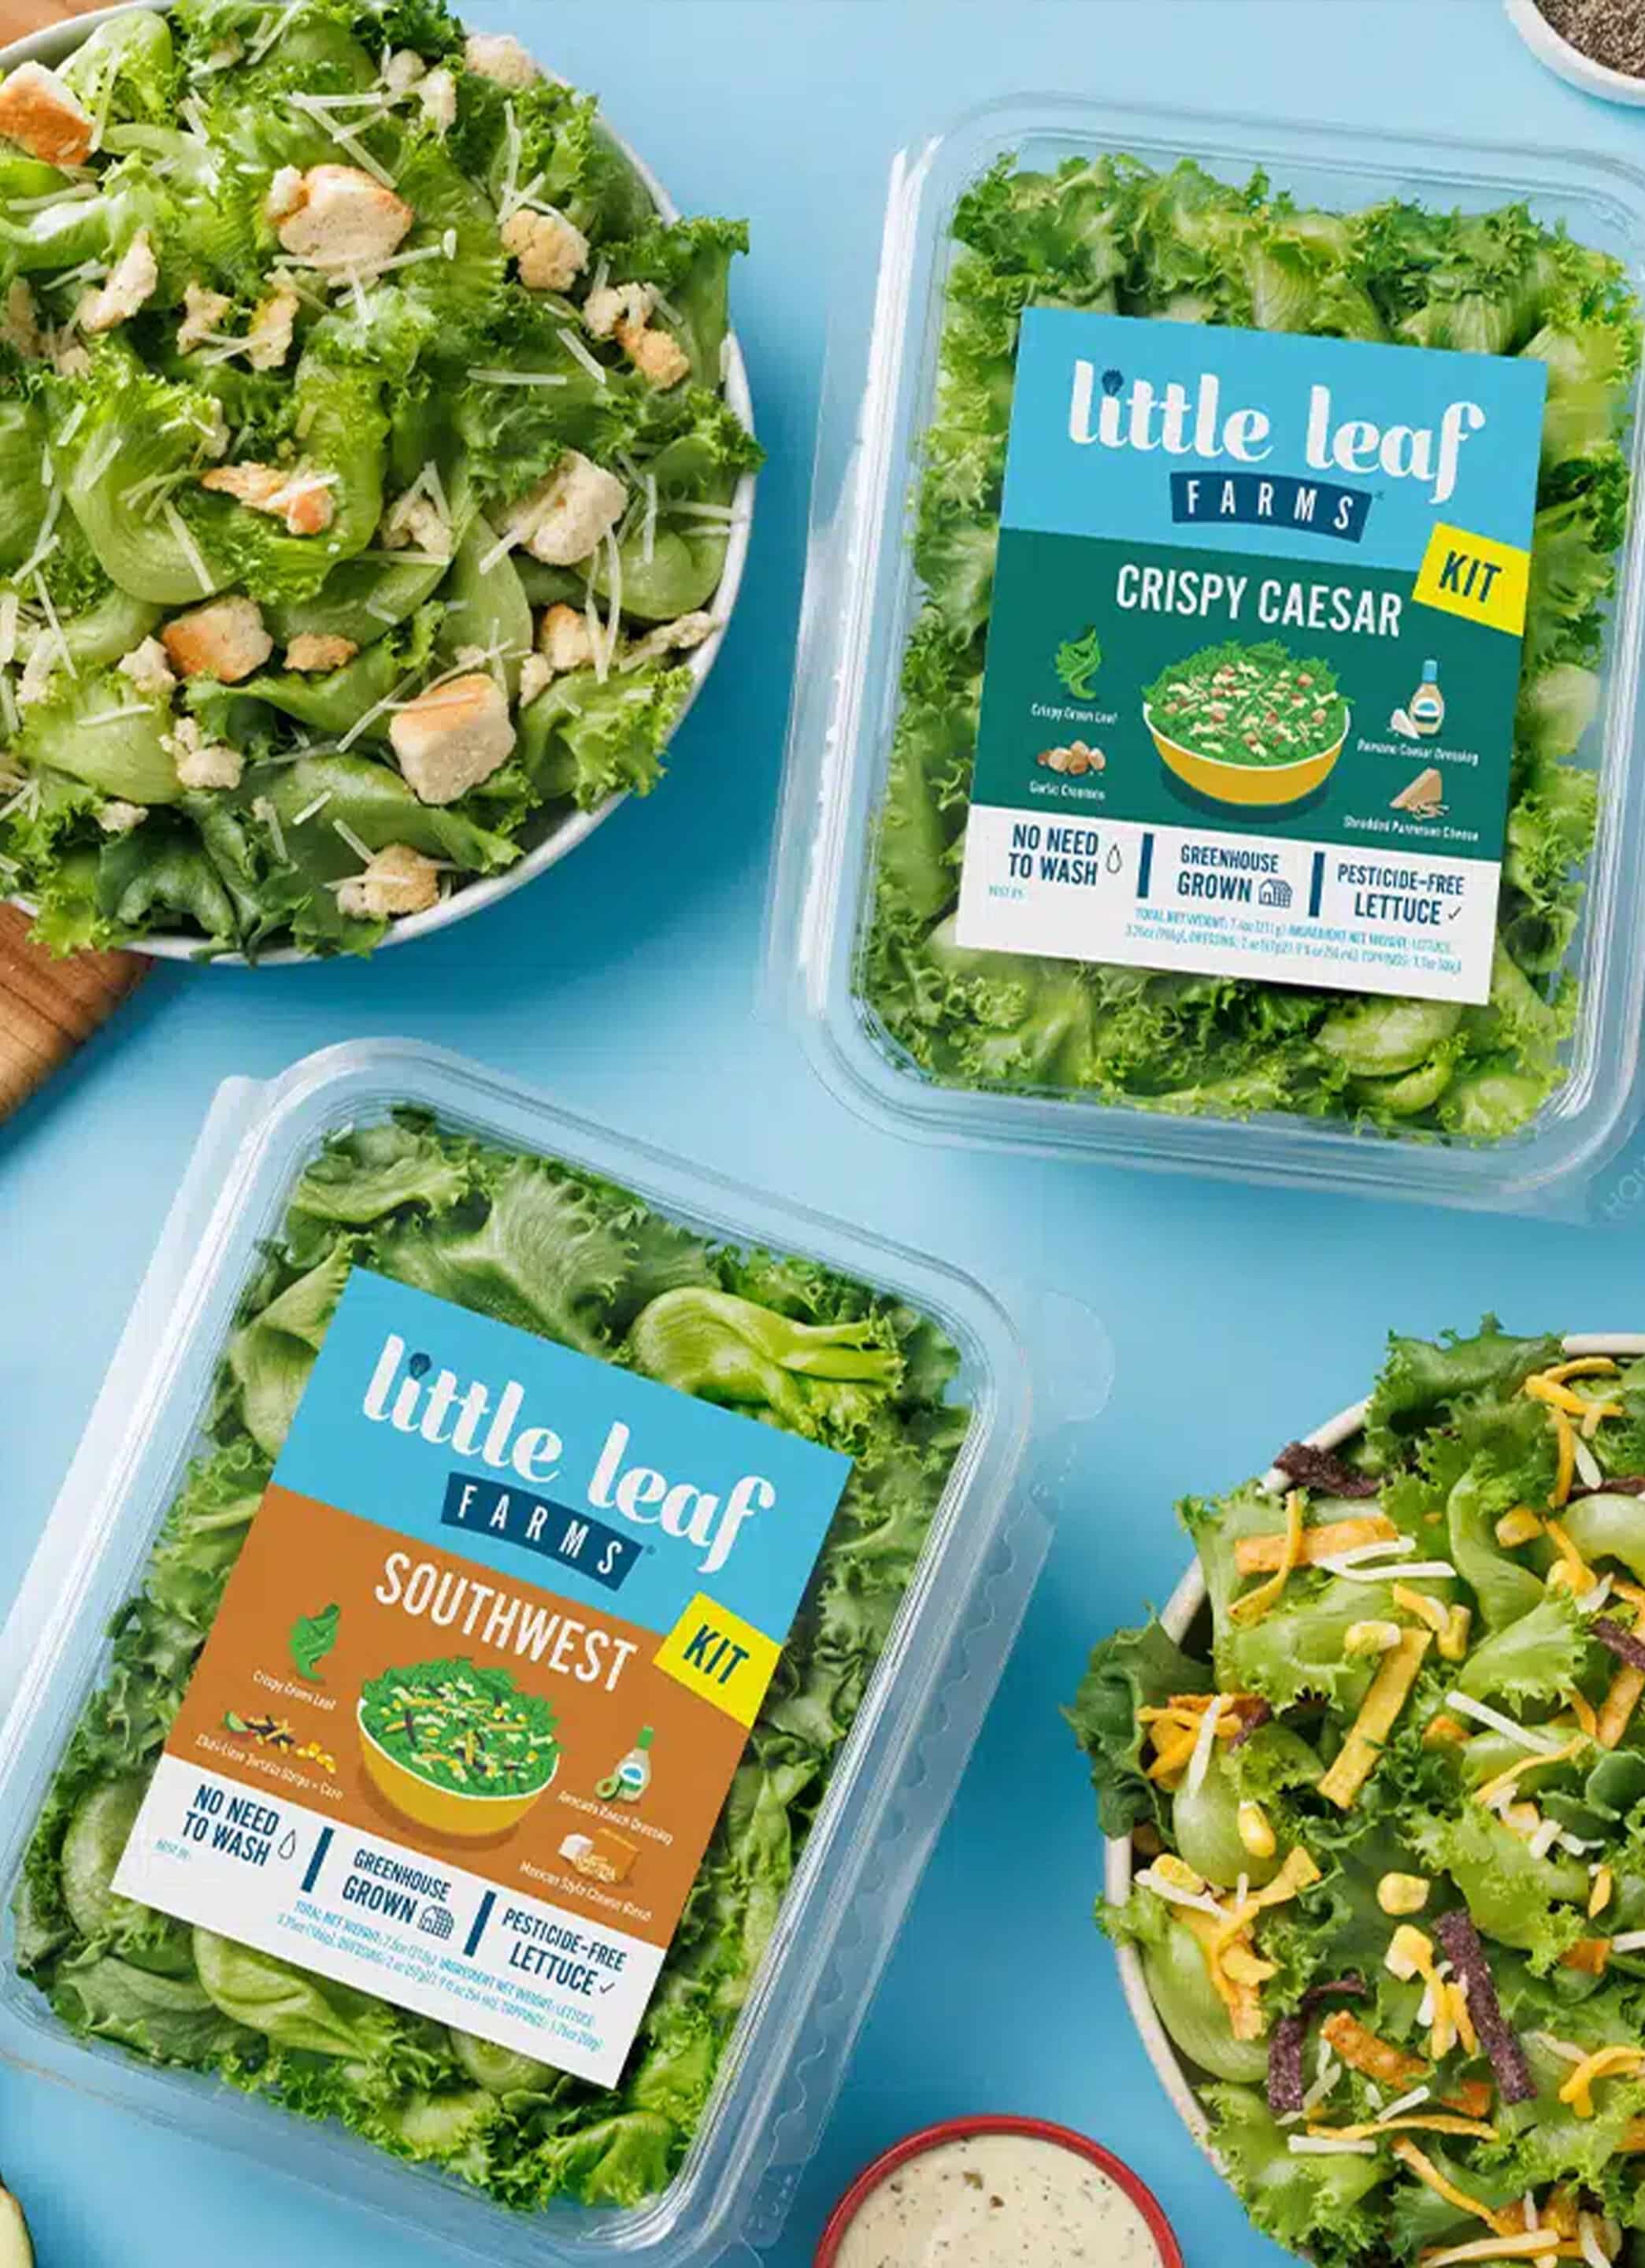 Buy LITTLE LEAF FARMS Products at Whole Foods Market